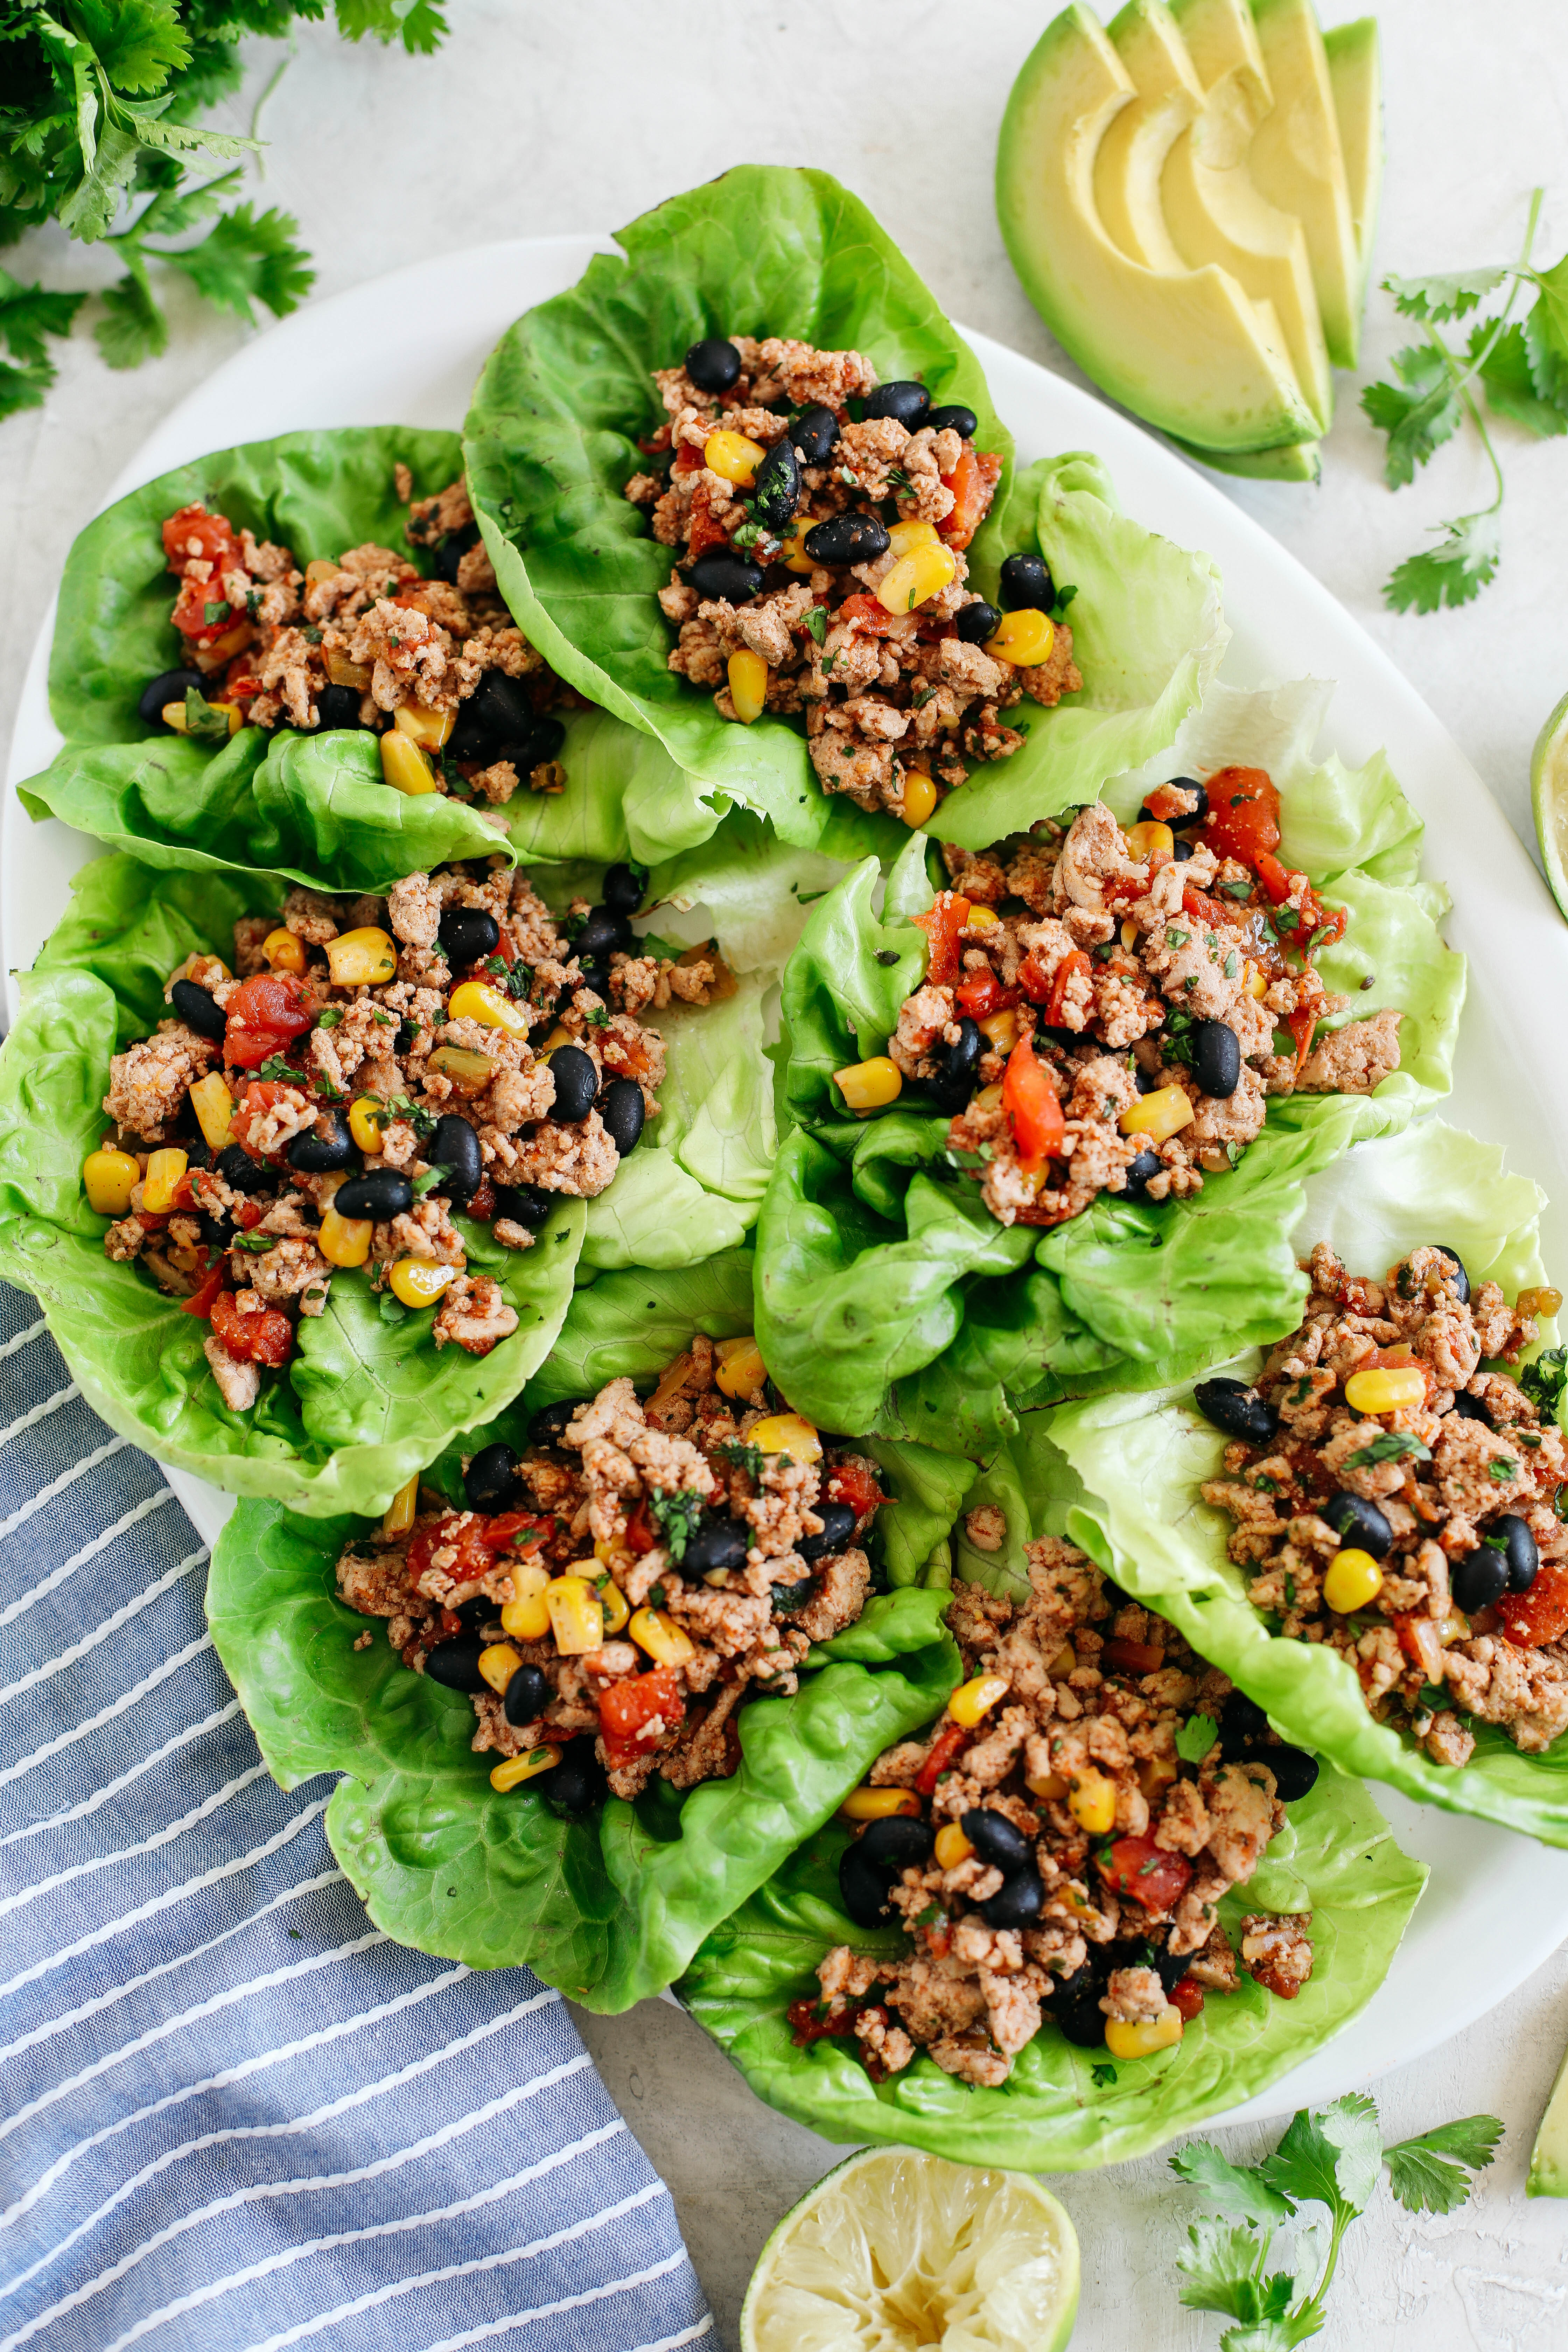 Light and healthy Turkey Taco Lettuce Wraps that are an easy low carb alternative to traditional tacos, are super flavorful and take less than 20 minutes to make!